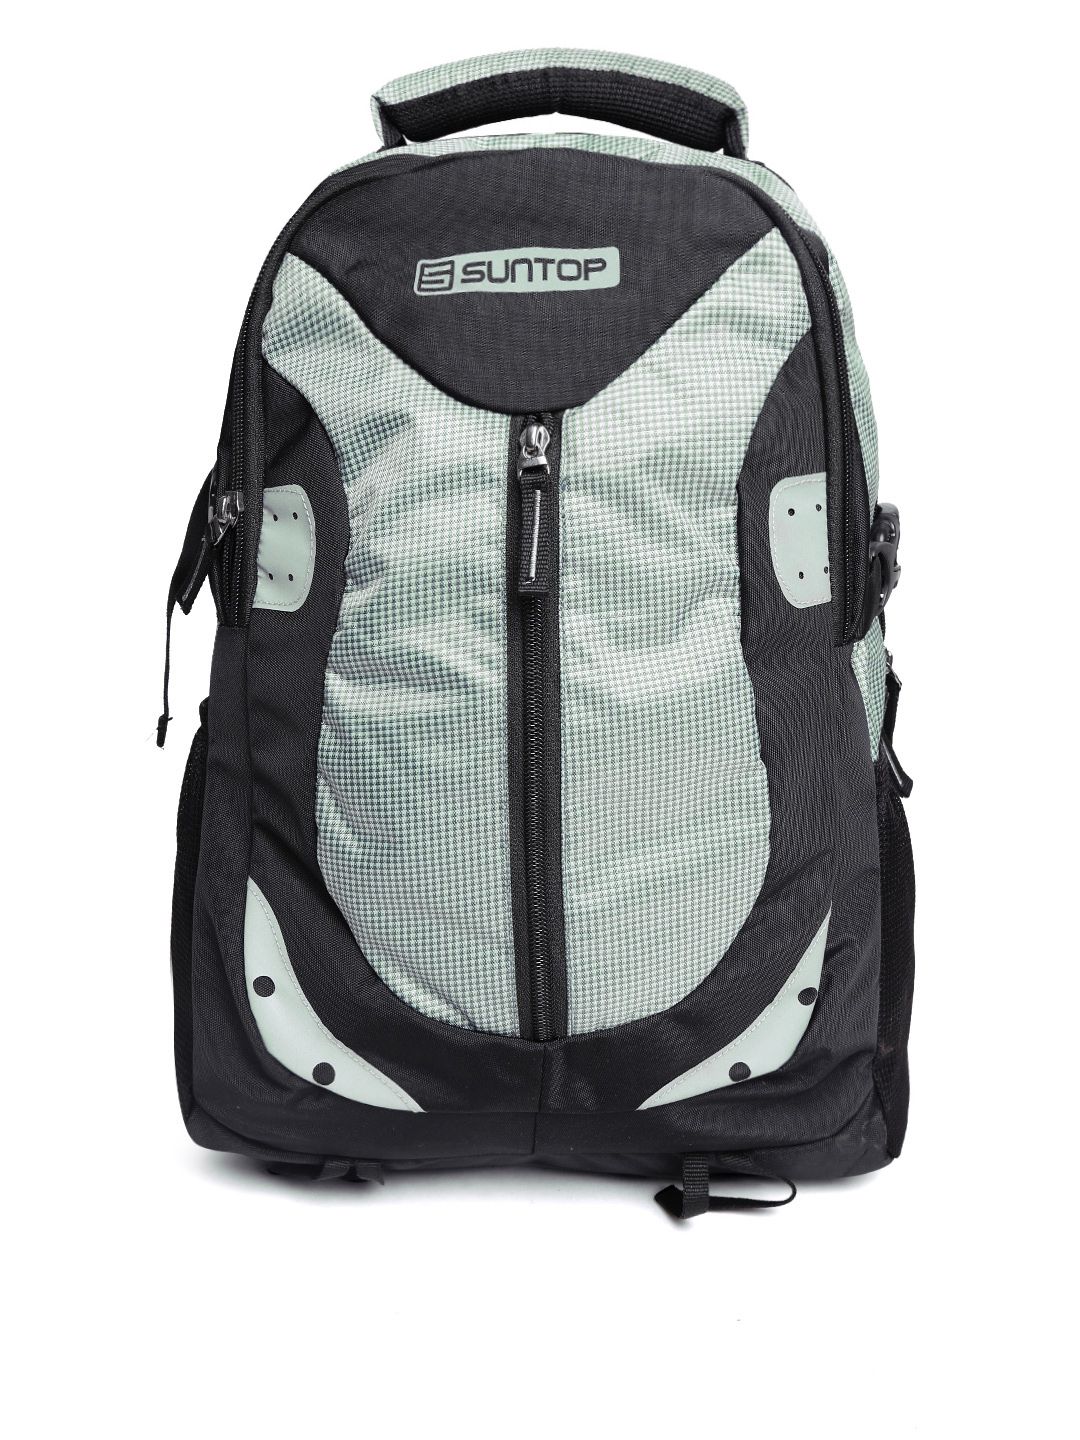 Suntop Unisex Black & Grey Neo 9 Checked Laptop Backpack Price in India